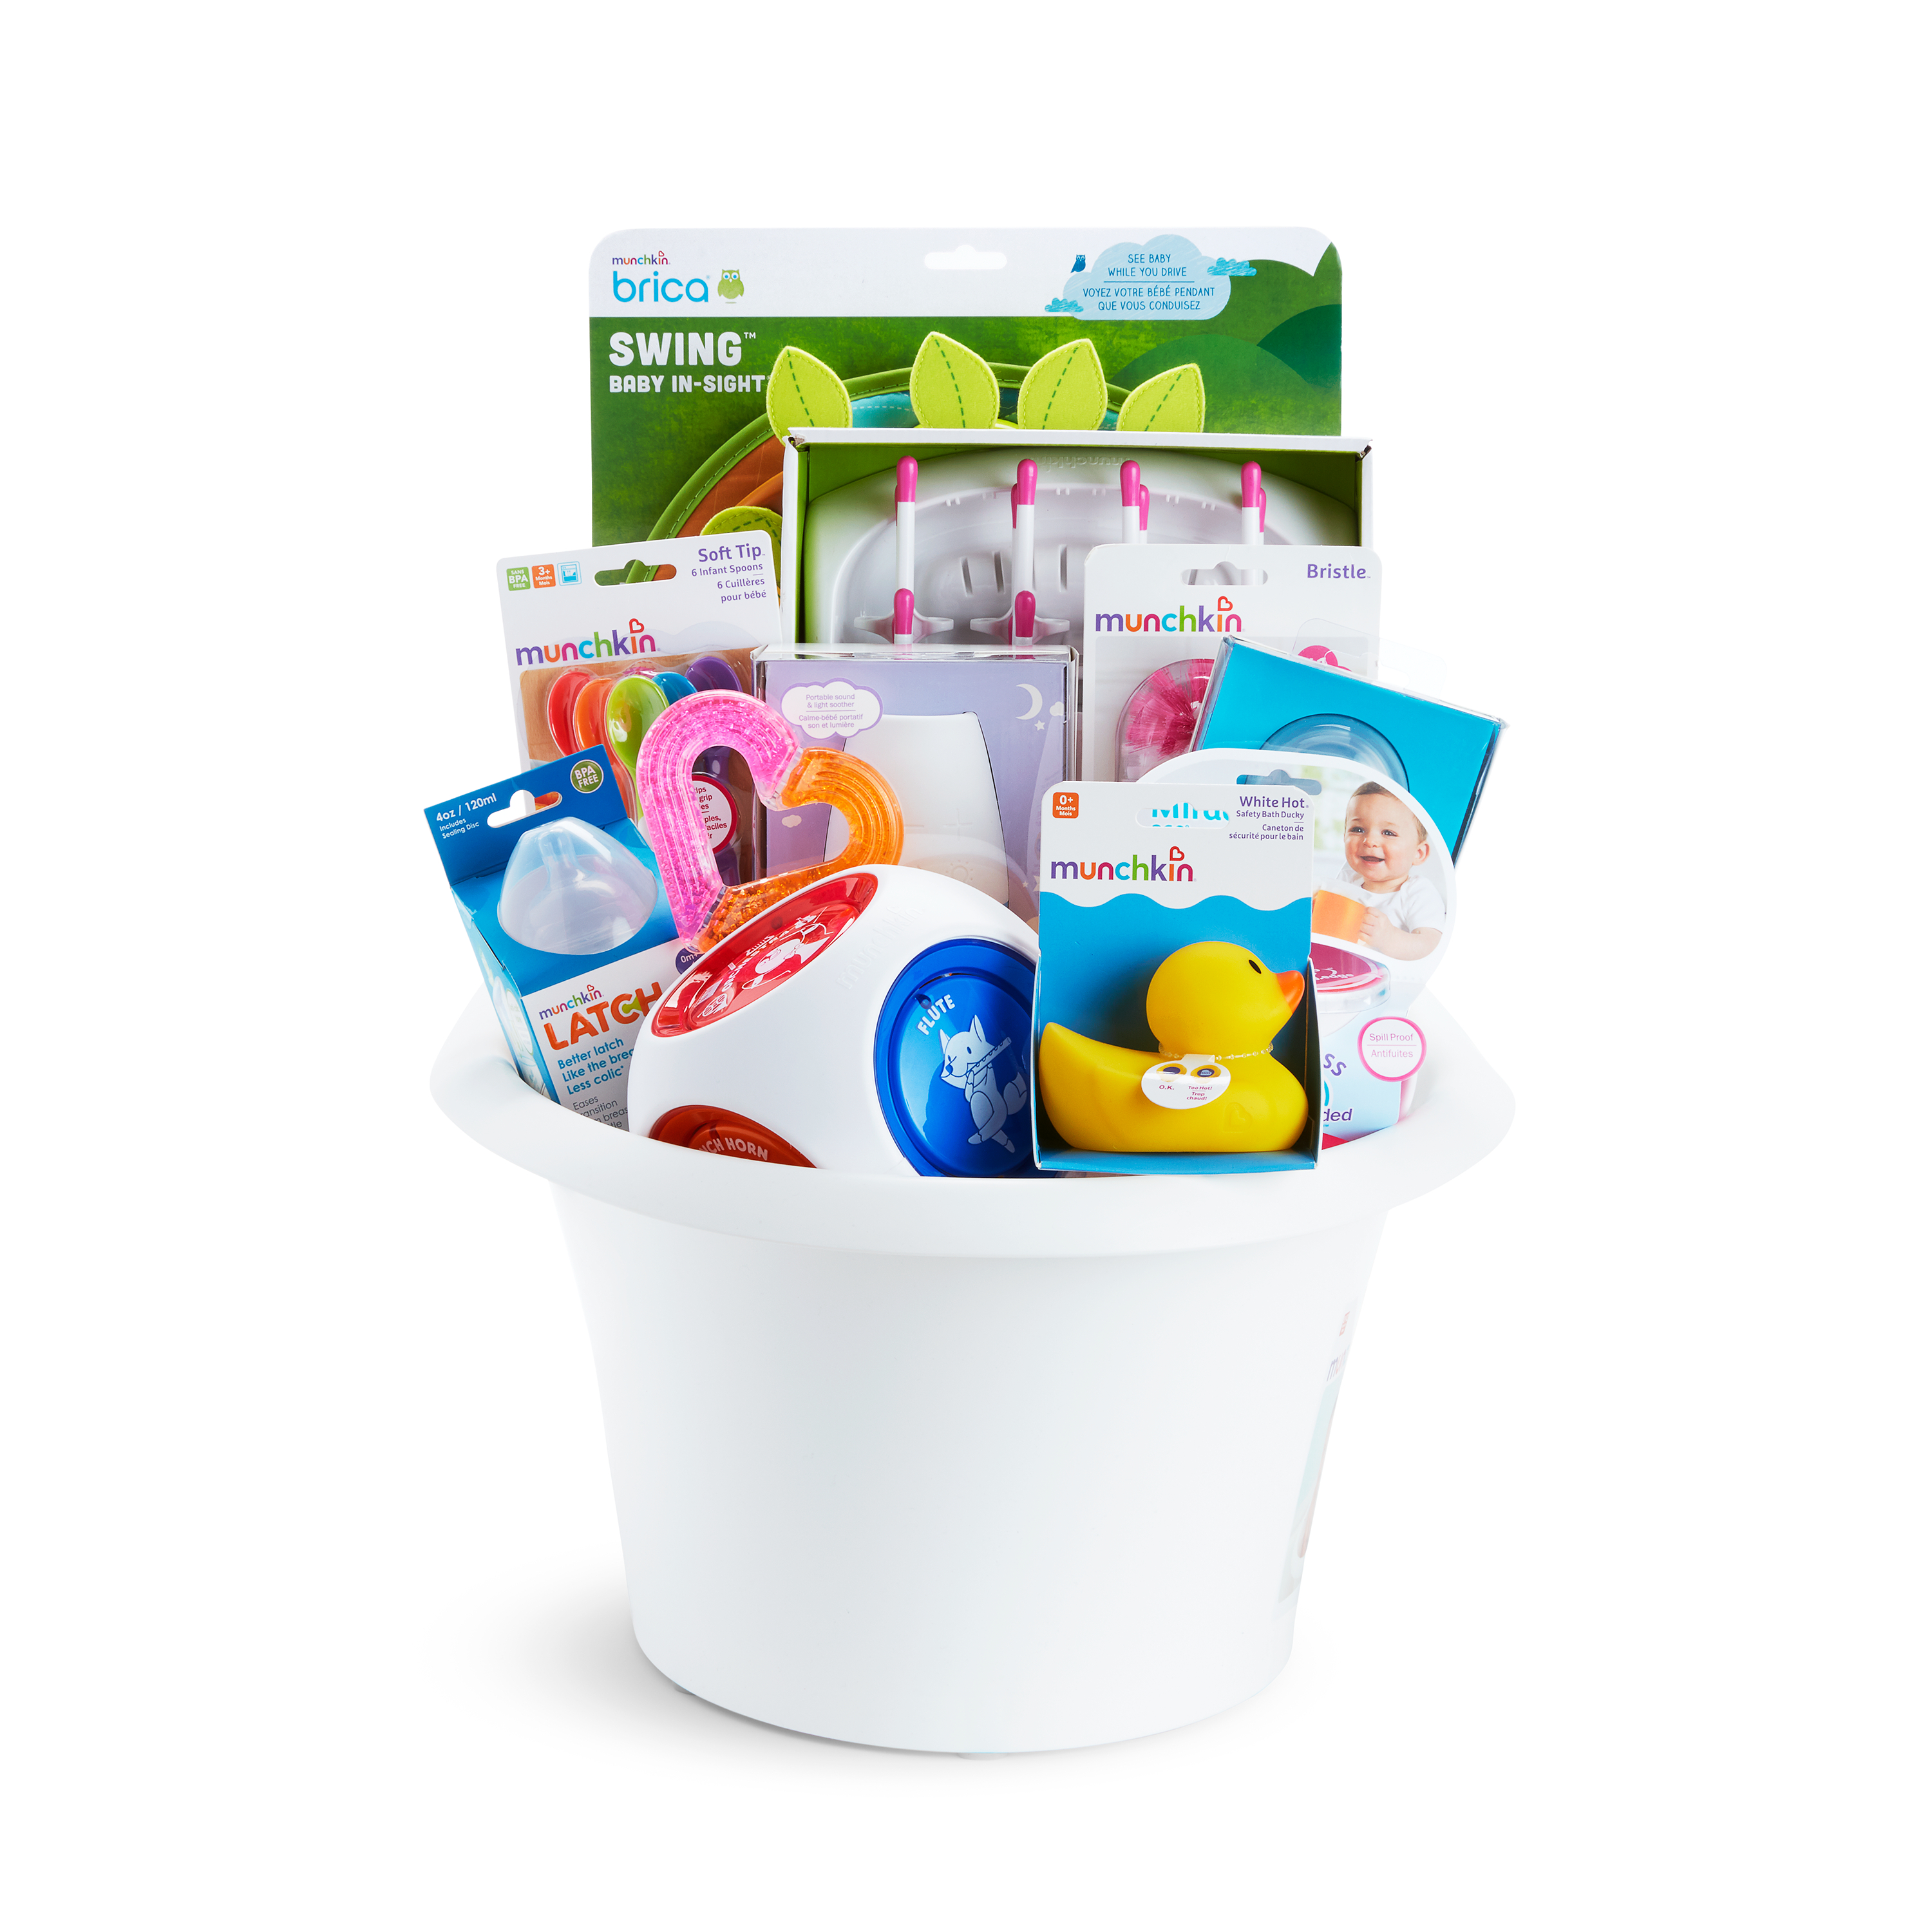 Munchkin My Munchkin Gift Basket, Great for Baby Showers, Includes 15 Baby Products, Pink - image 2 of 3